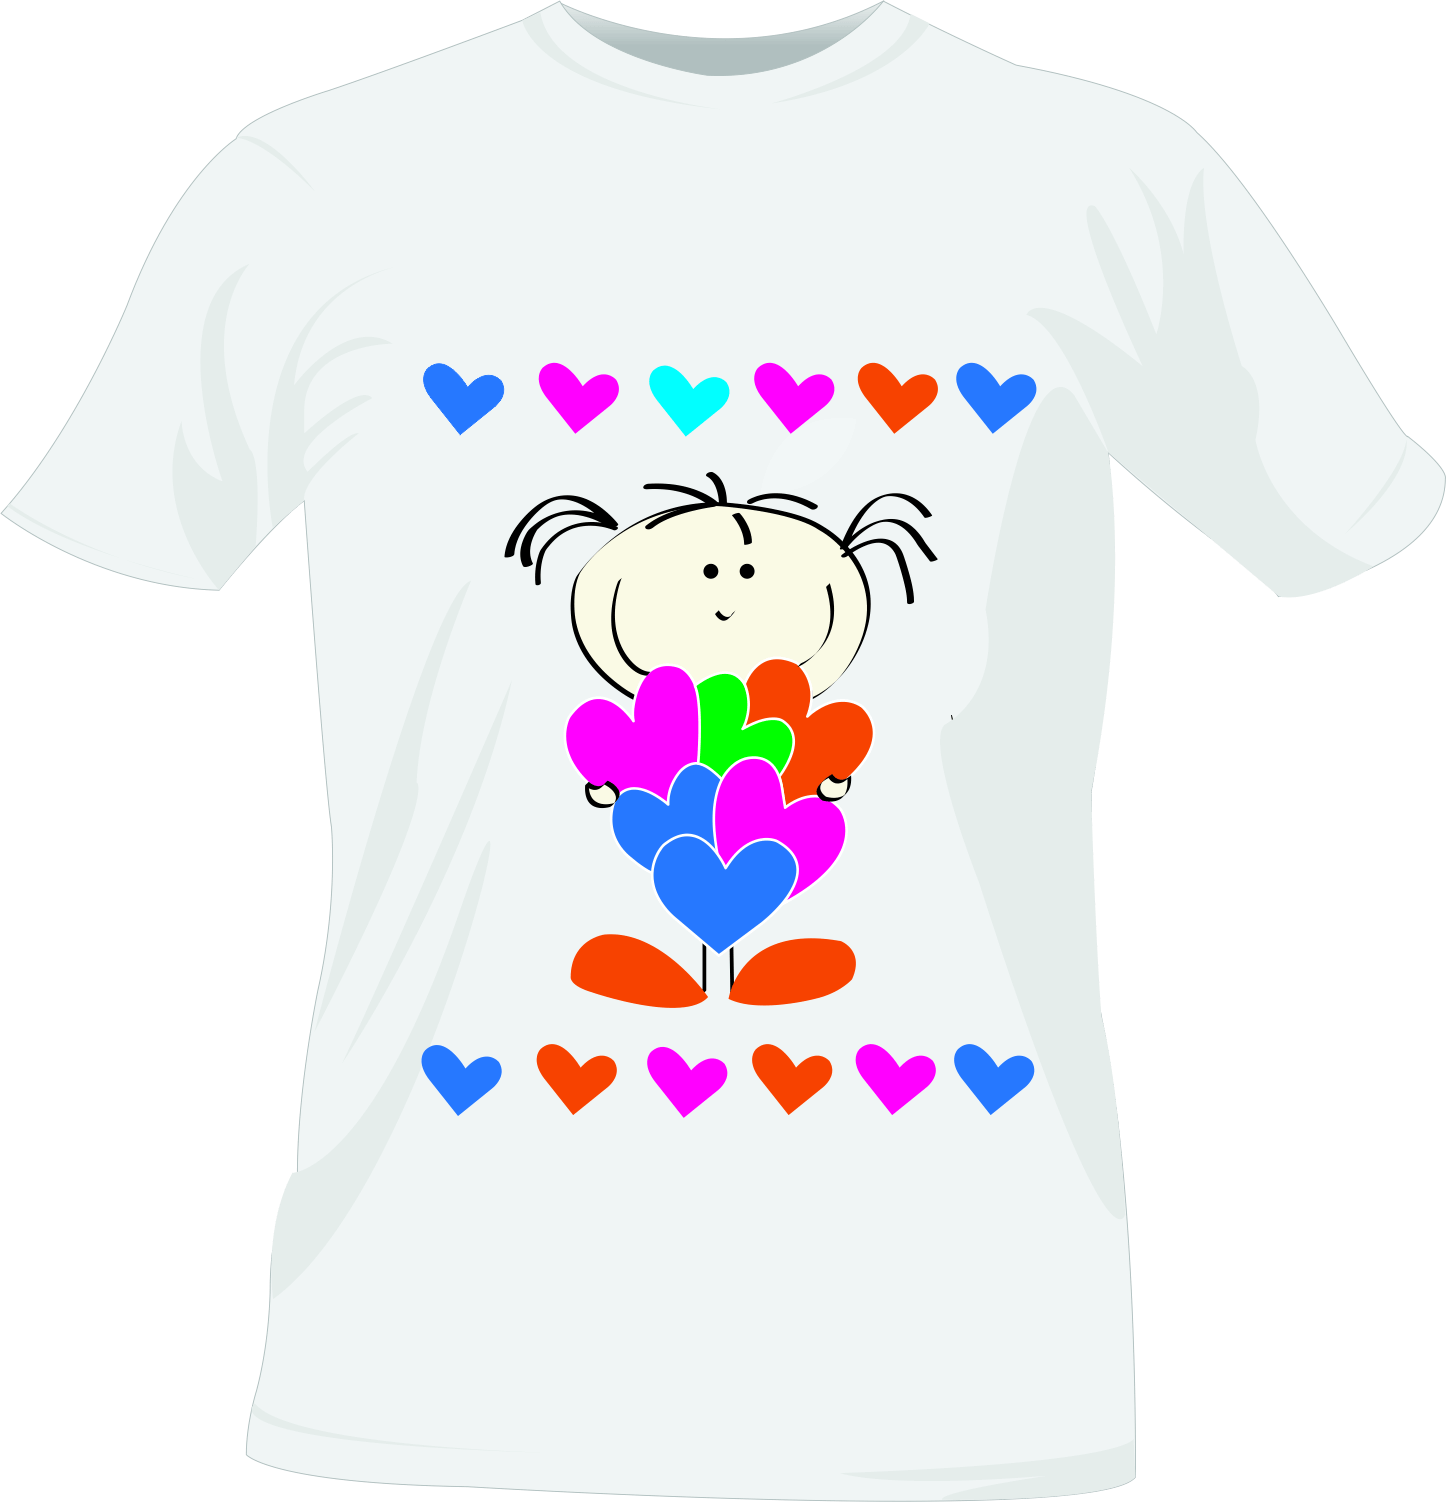 Download Colorful Hearts T Shirt Design | Wallpapers.com